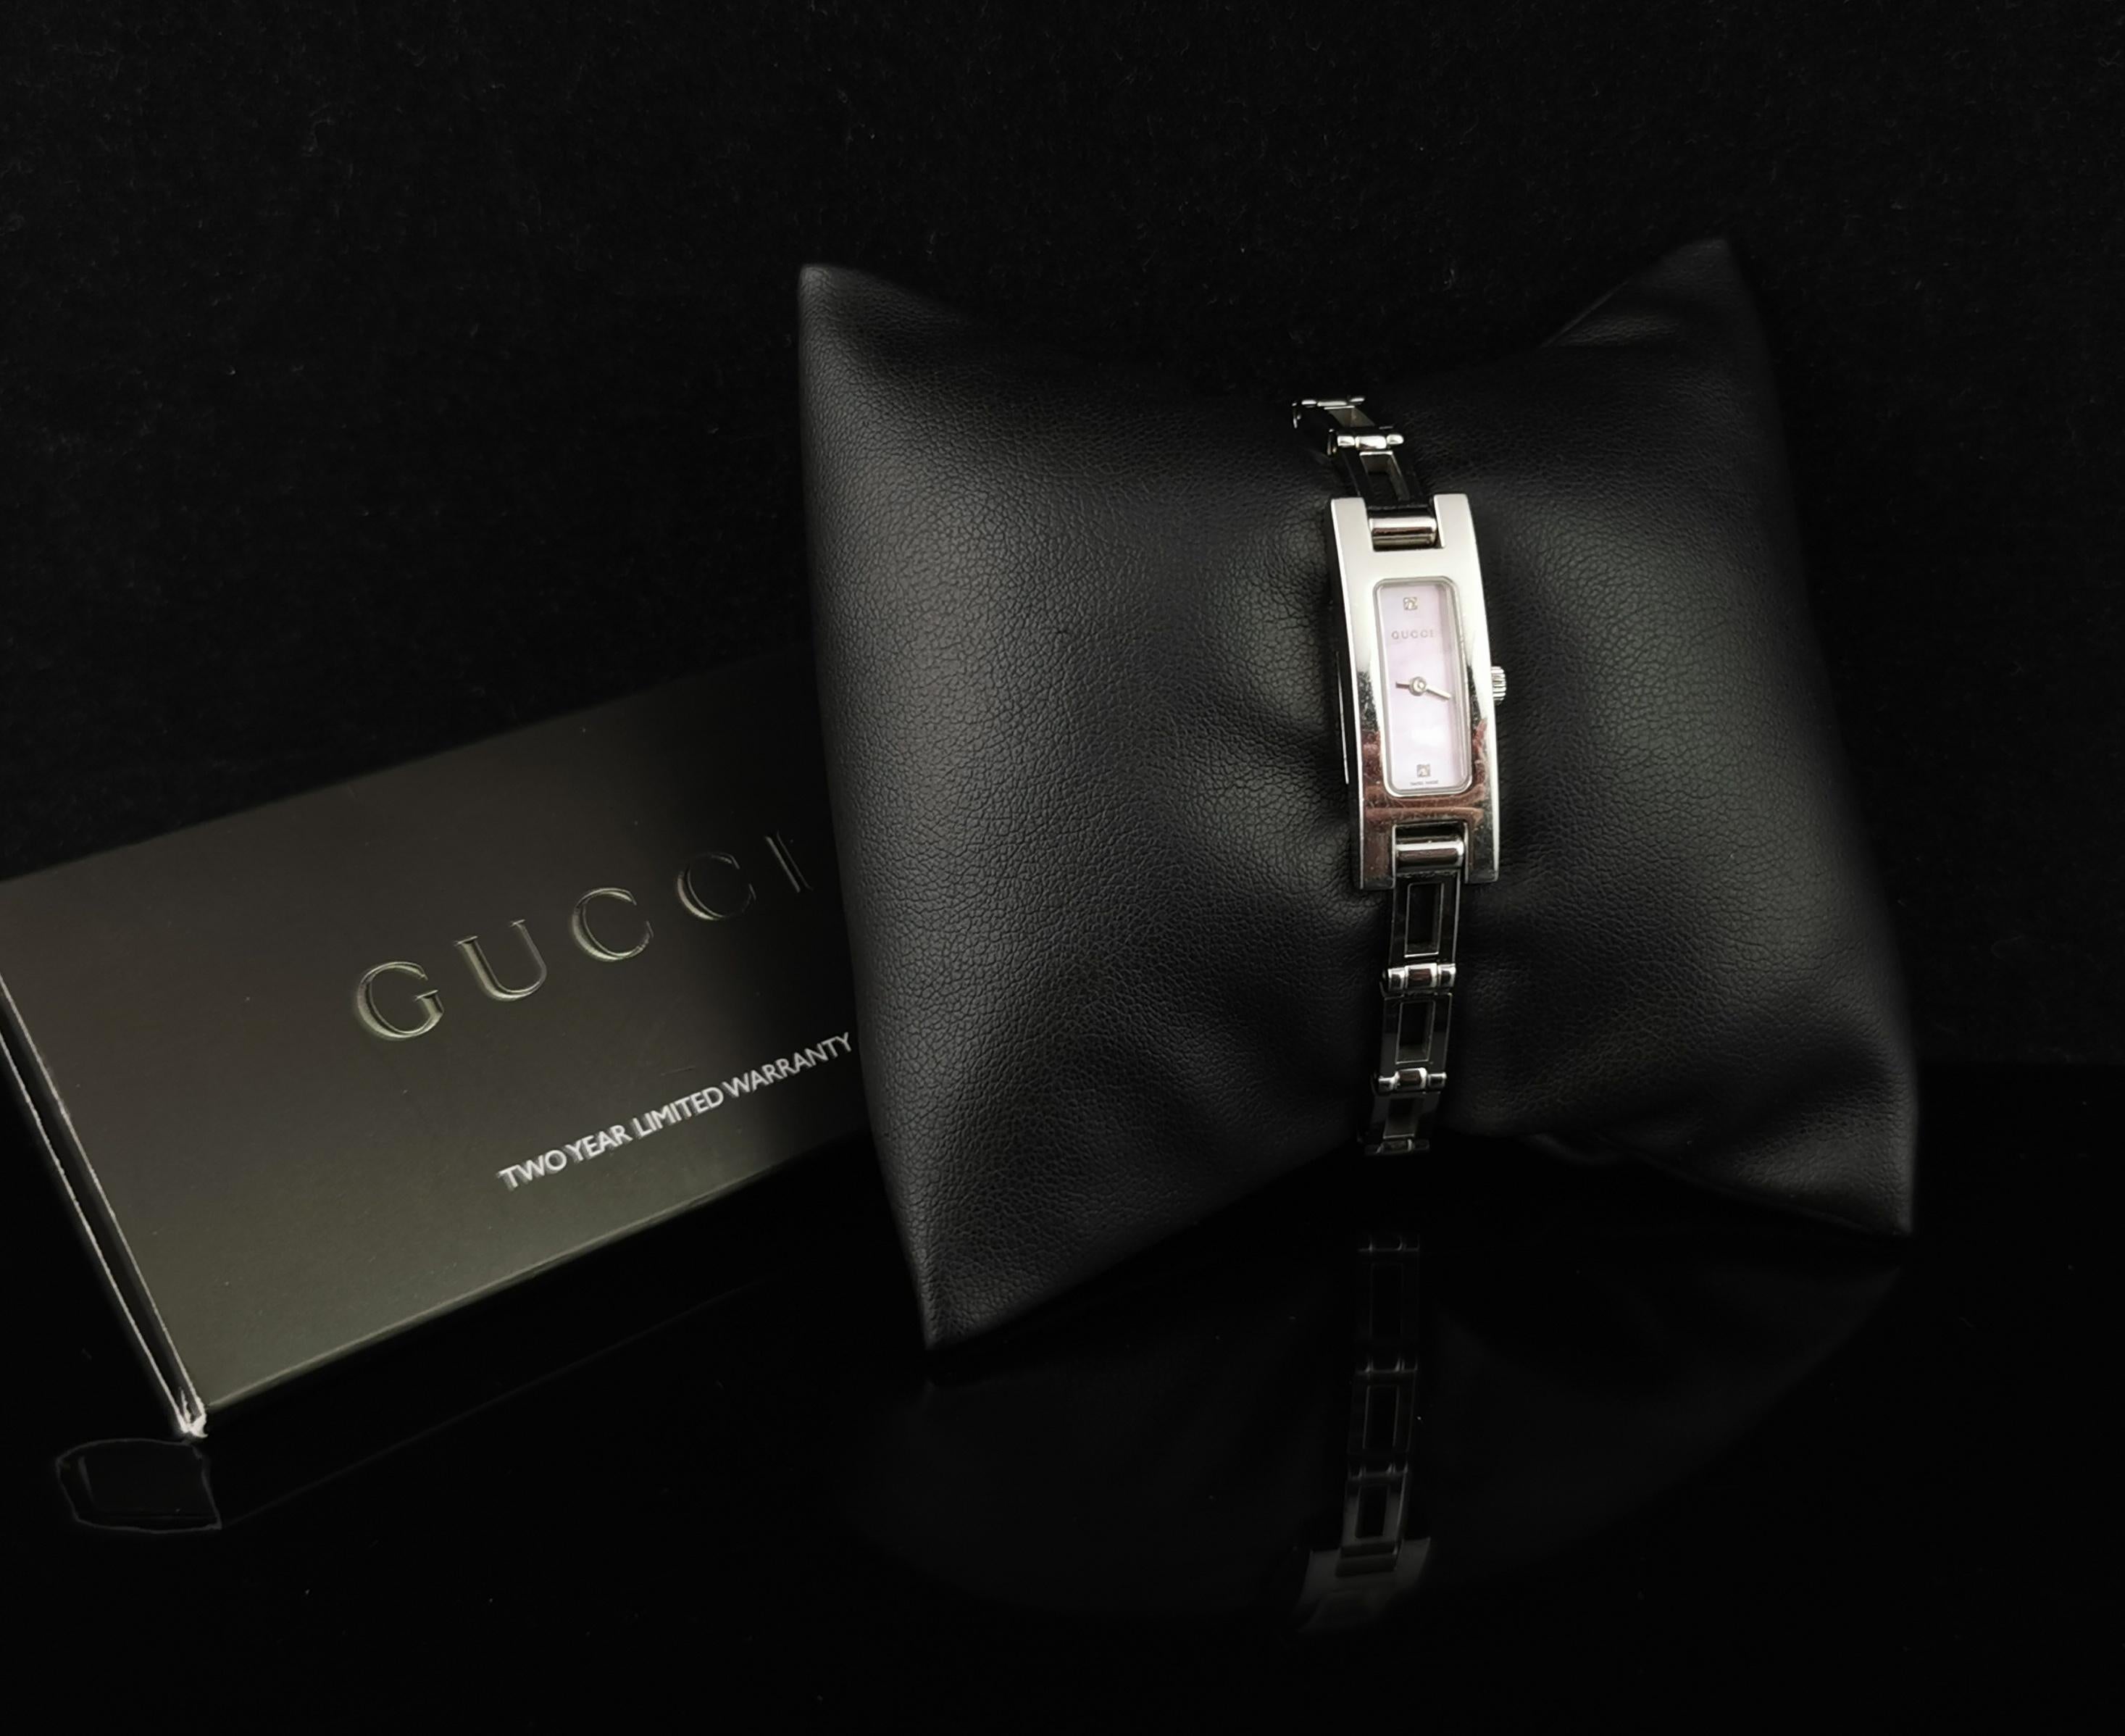 A stylish Gucci 3900l stainless steel watch.

This is a bracelet strap watch with a nice sleek stainless steel bracelet strap with a brick type link.

The case is stainless steel with a light iridescent pink dial set with two single diamond chips,